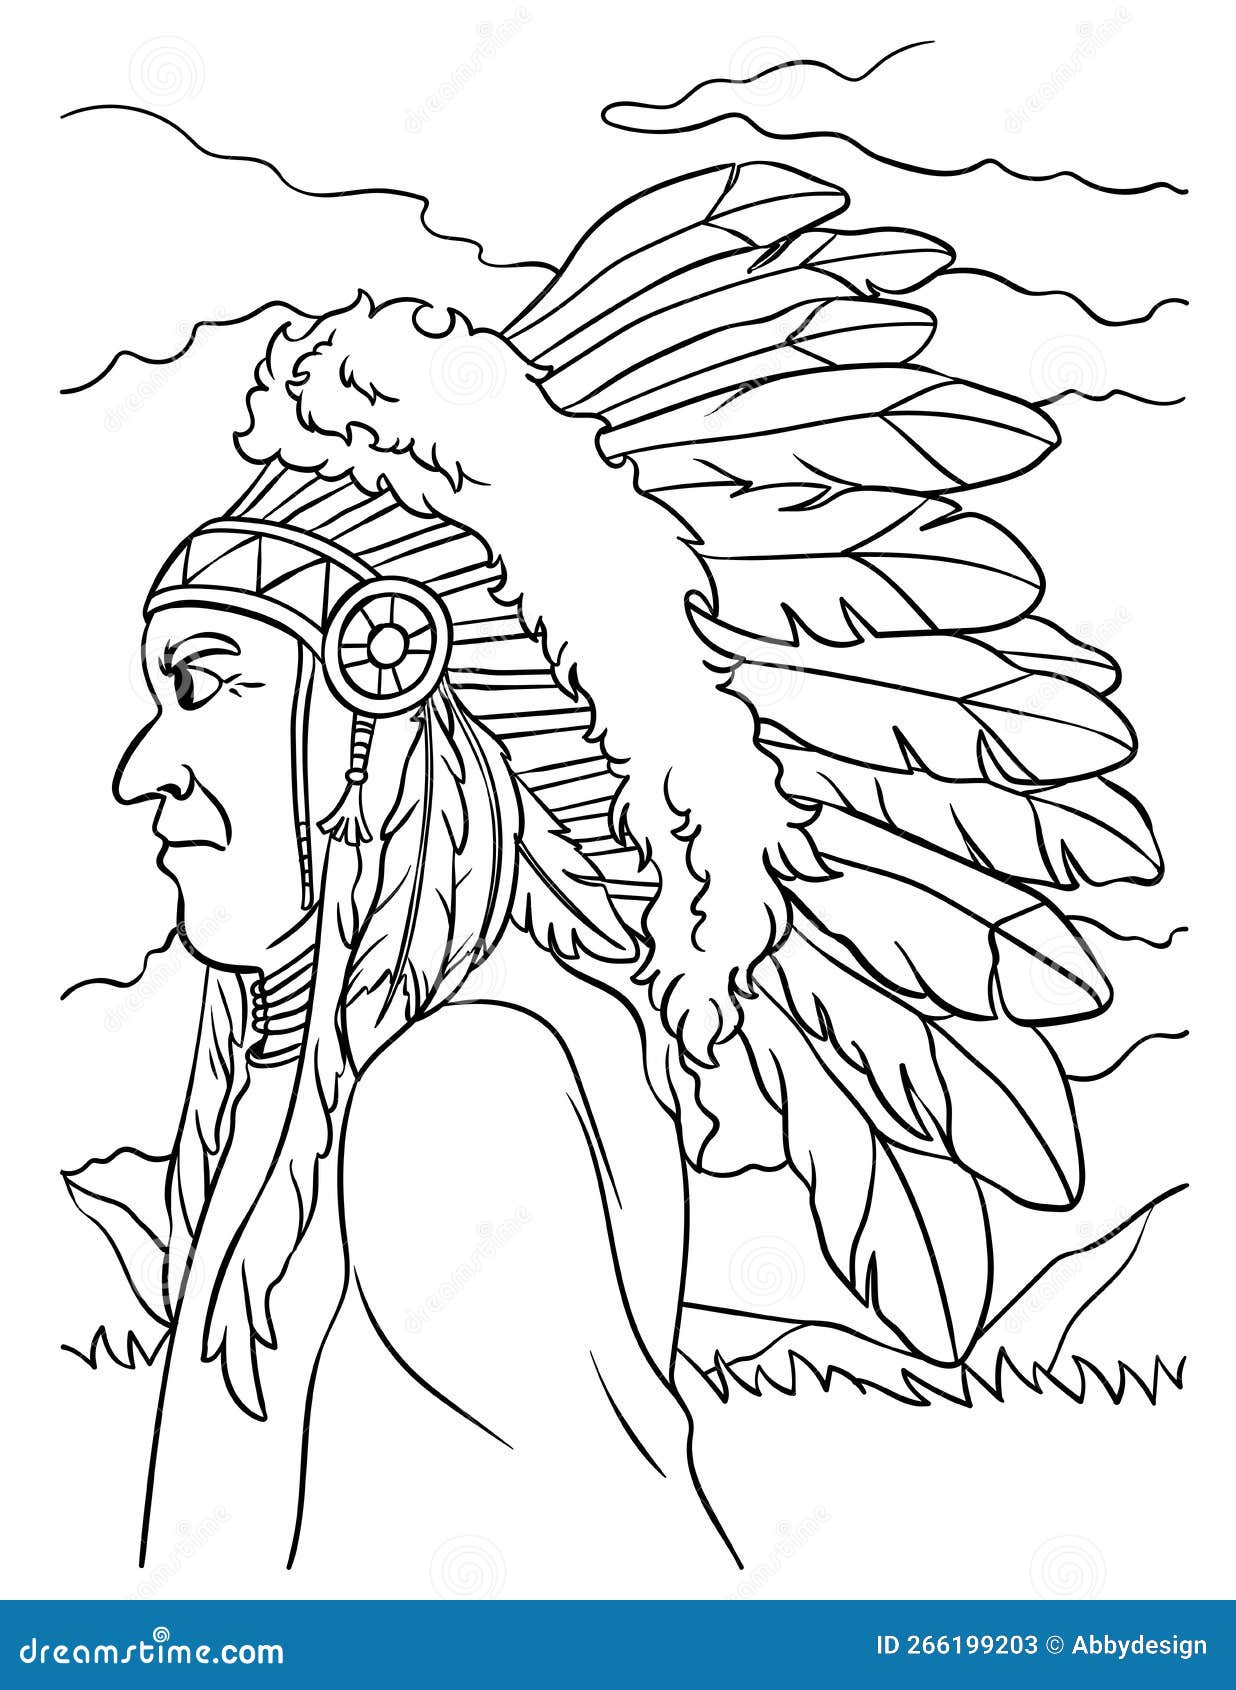 Native american indian chieftain coloring page stock vector